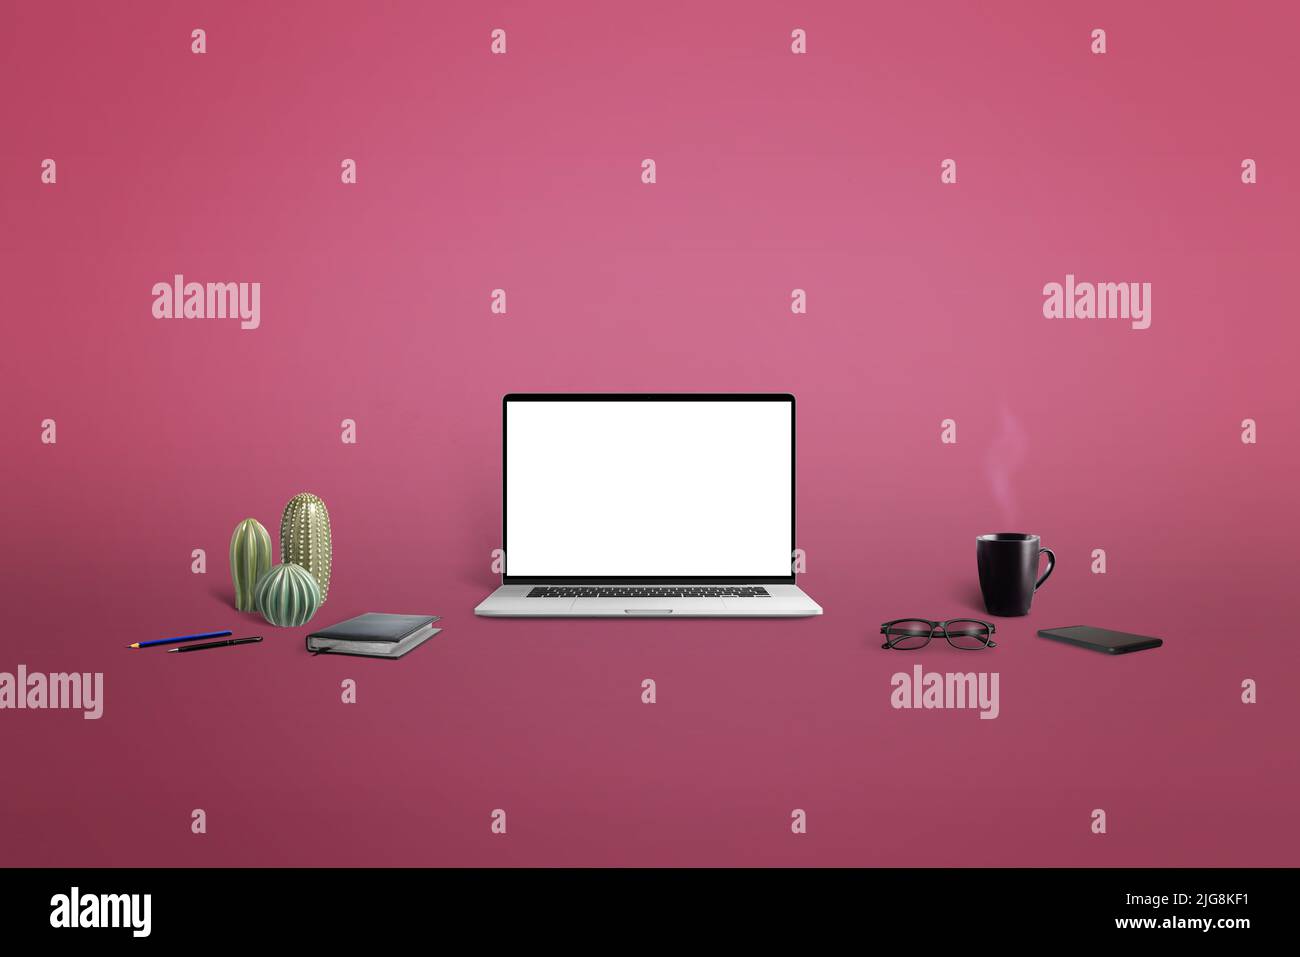 Laptop mockup surrounded by things to work on rose background. Isolated screen for web page presentation Stock Photo